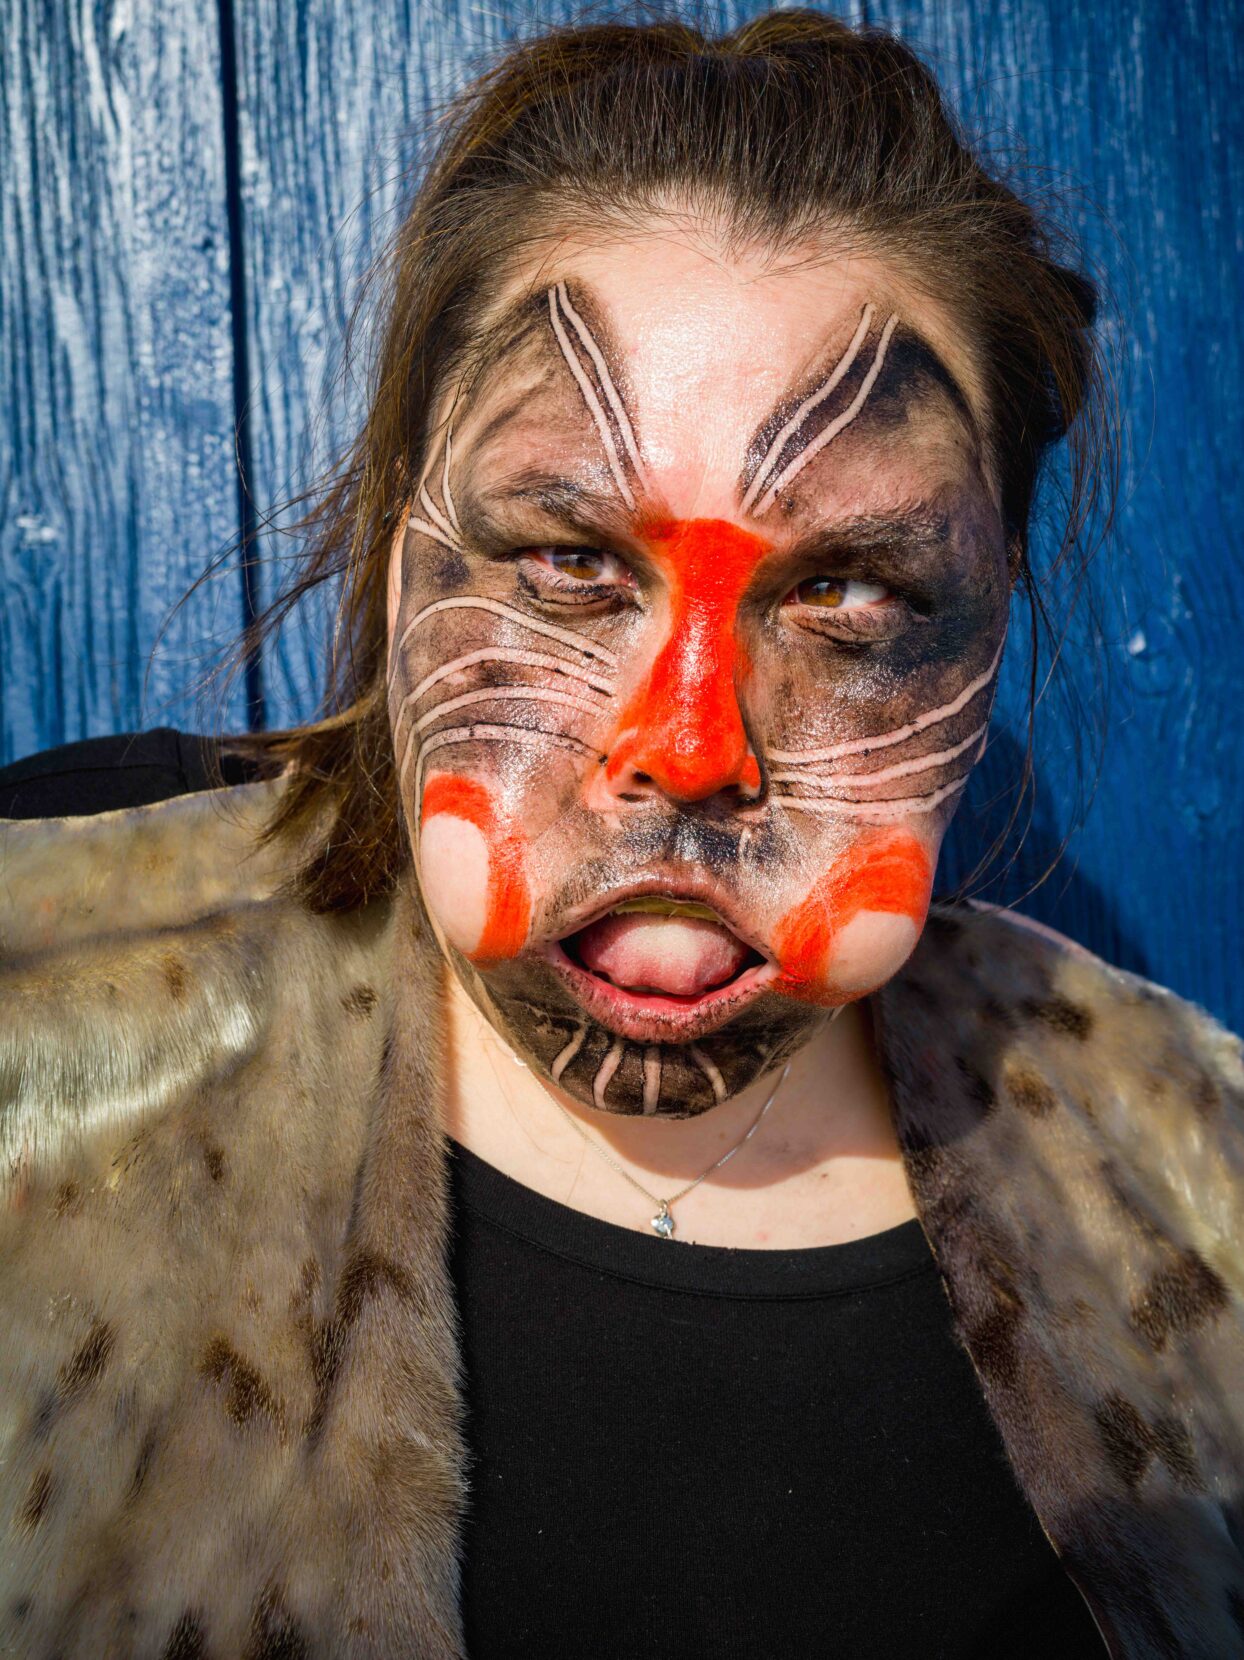 A woman stands against a blue-painted wooden backdrop. Her face is painted in black and red and her cheeks puff out.